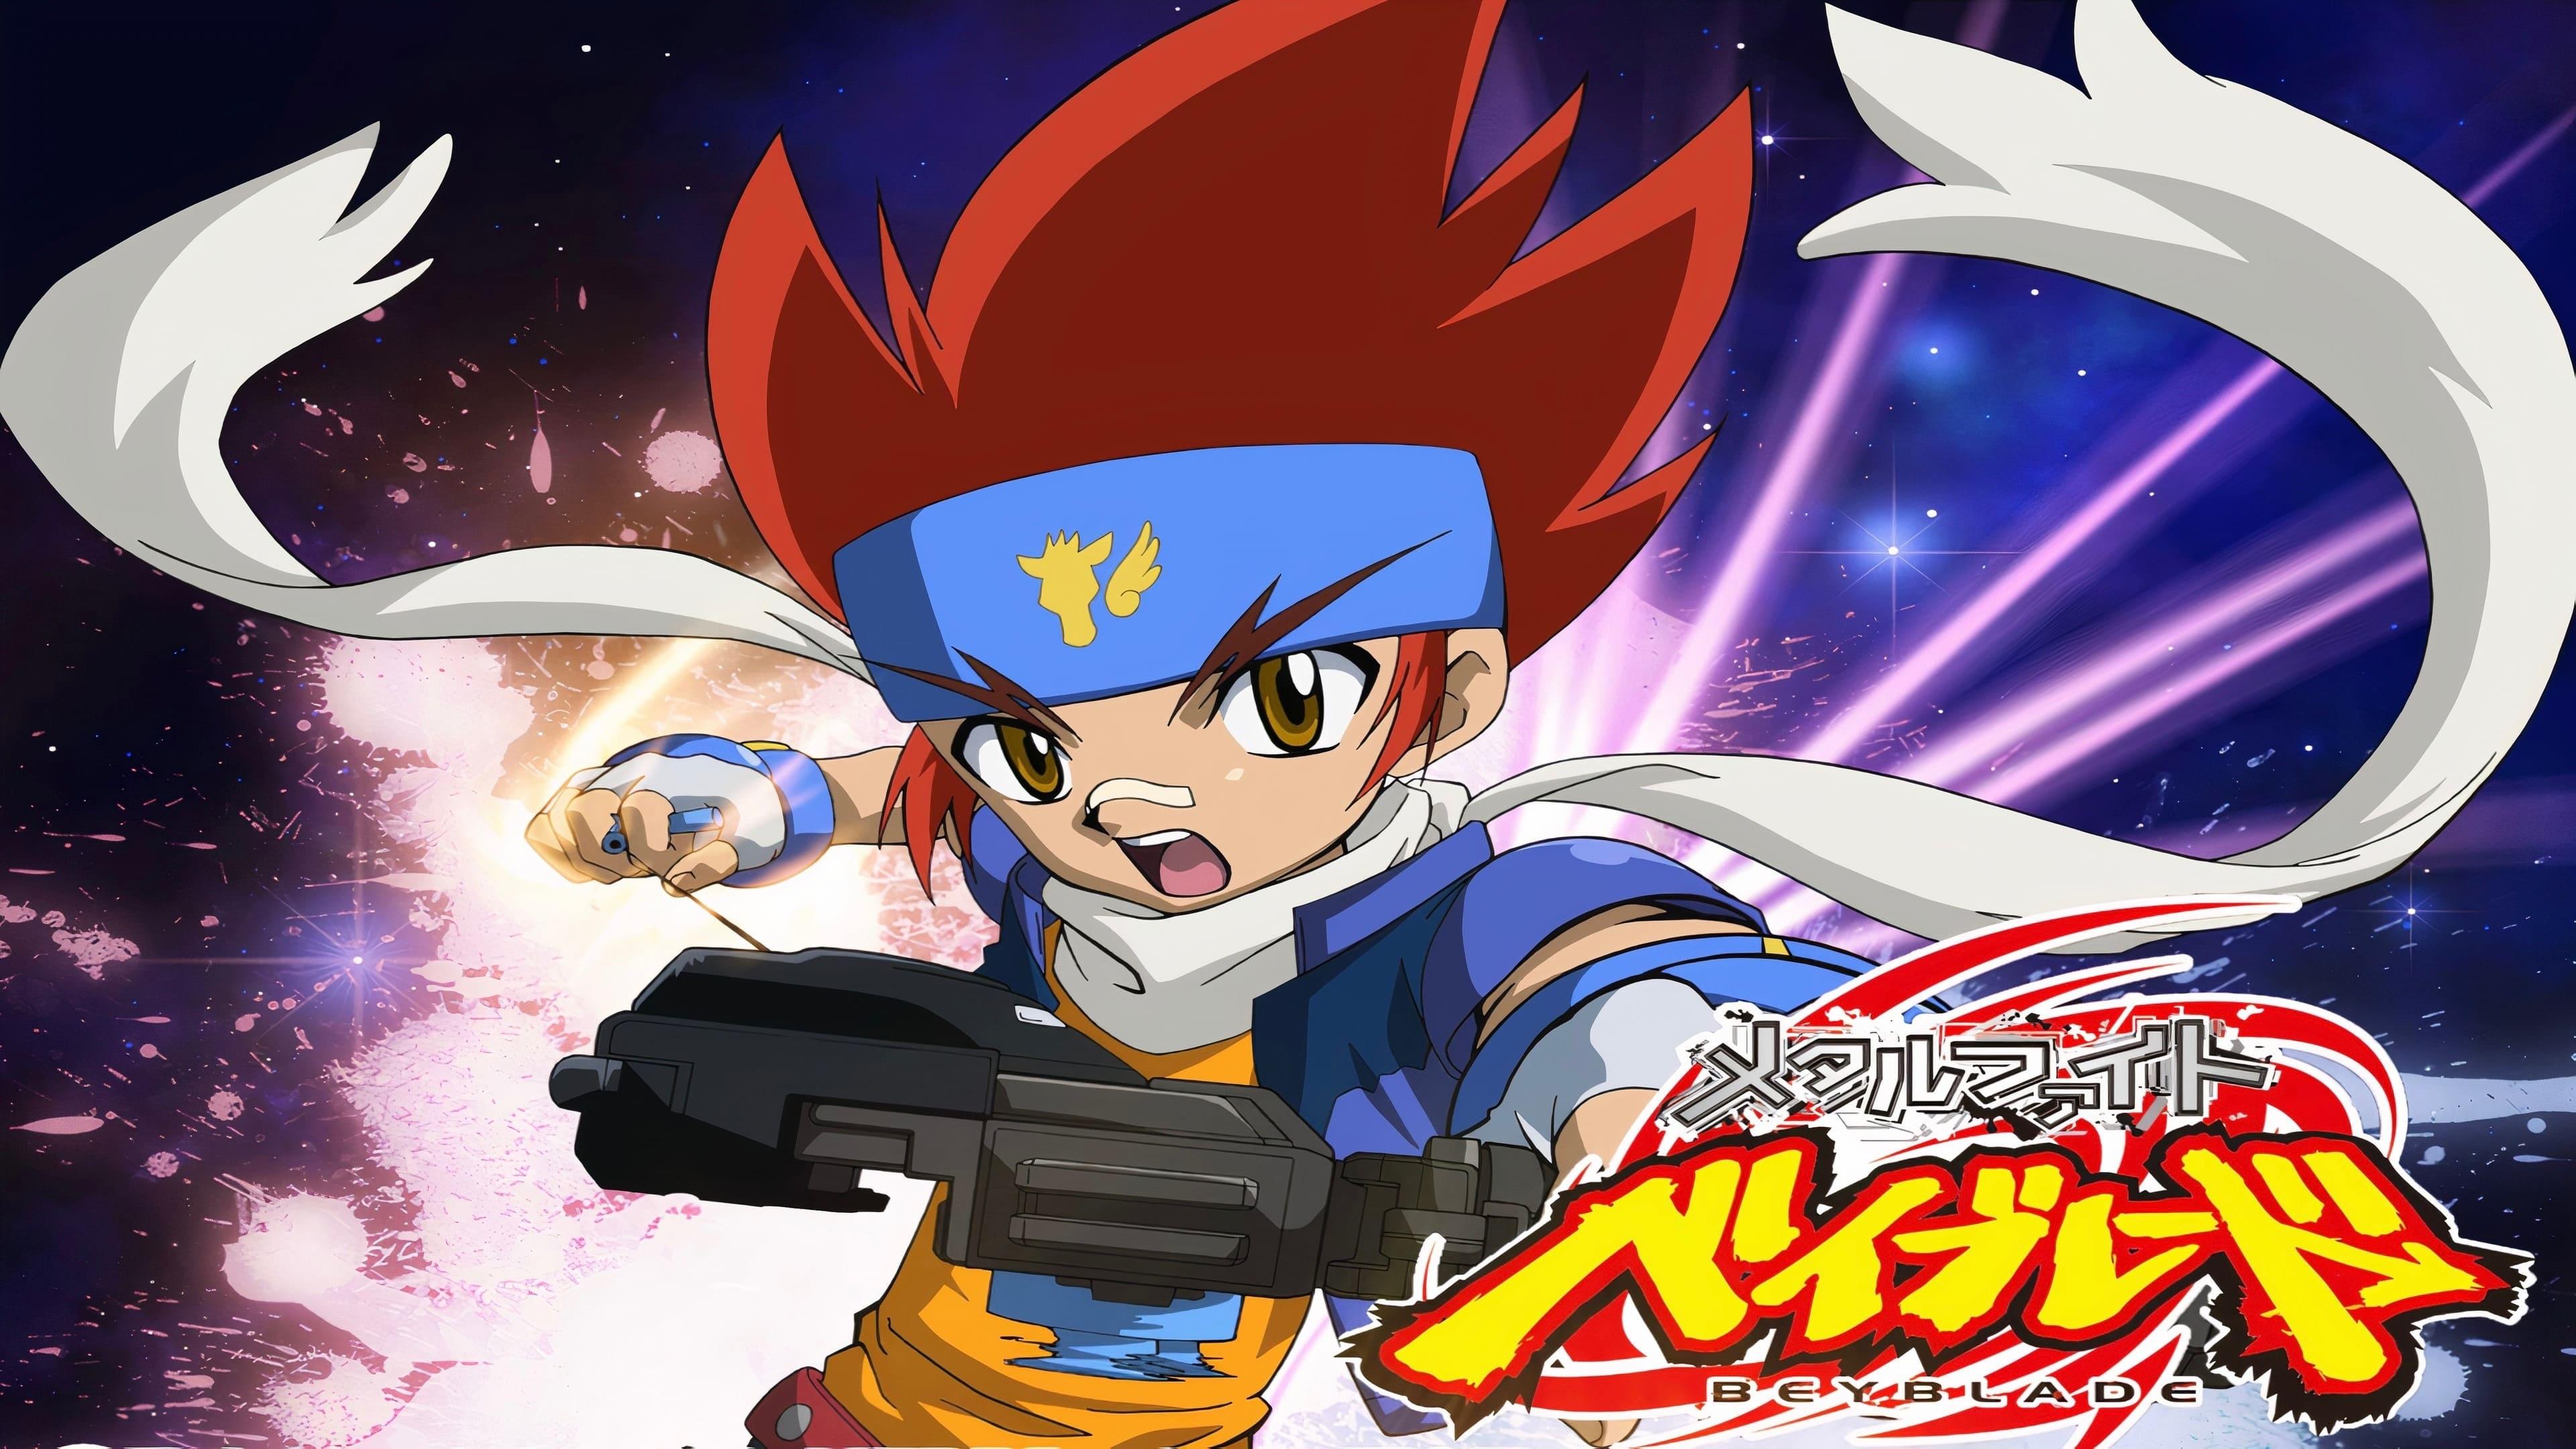 Beyblade X anime announces release date, cast, and more in latest PV